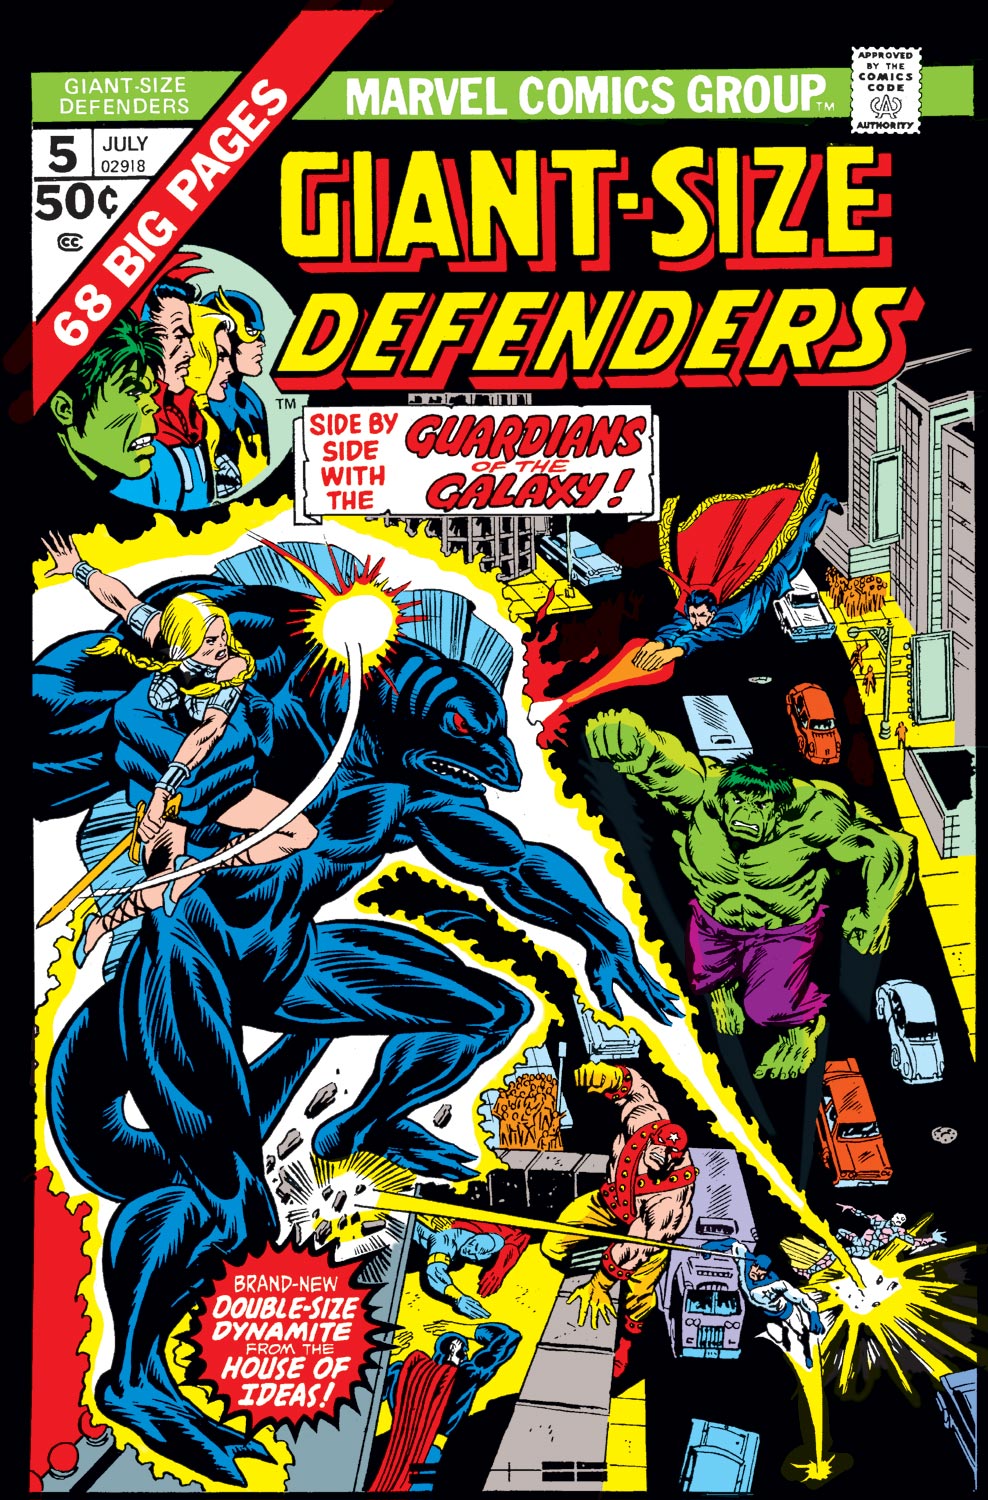 Giant-Size Defenders (1974) #5